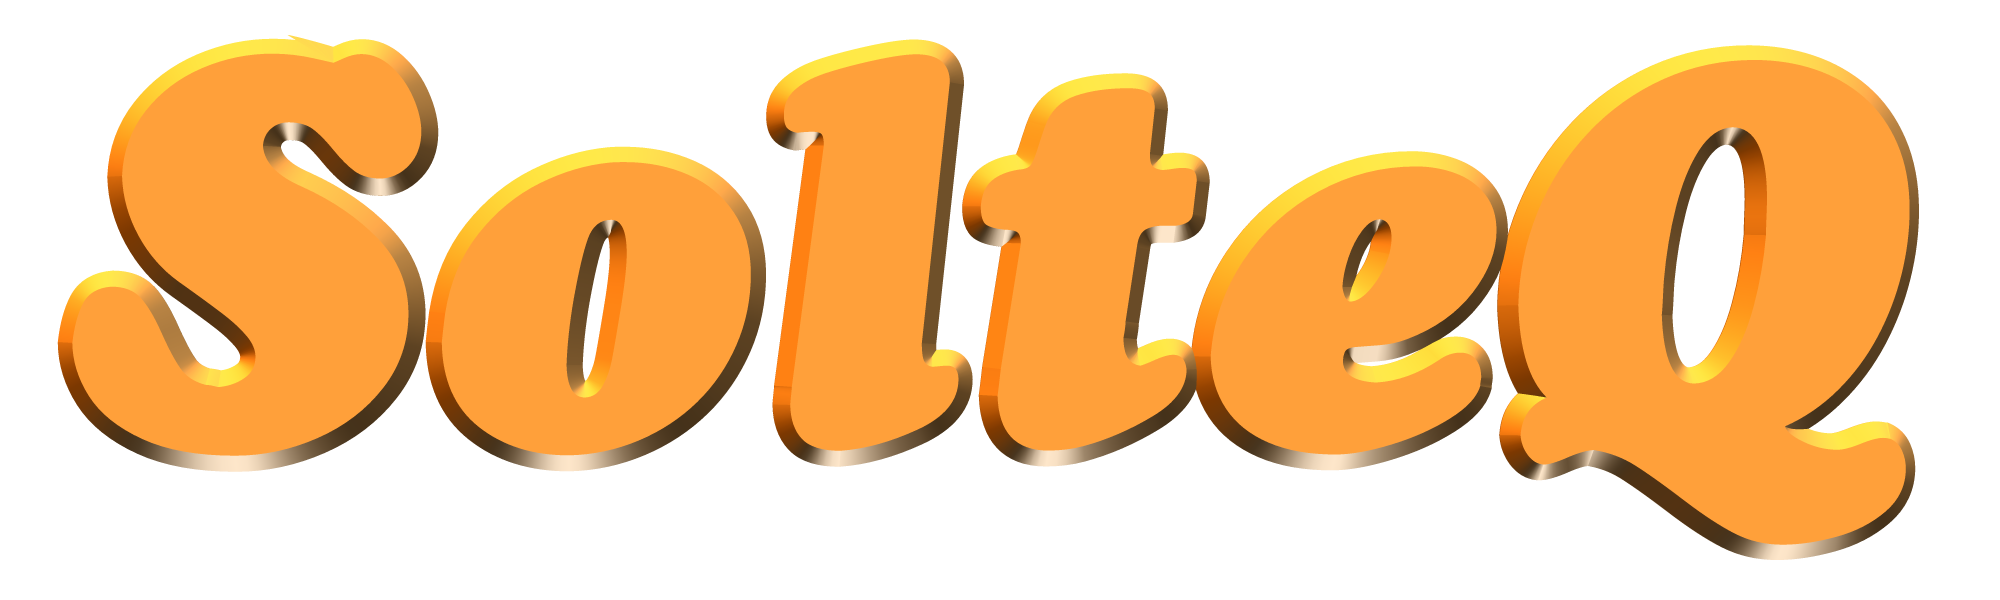 SolteQ